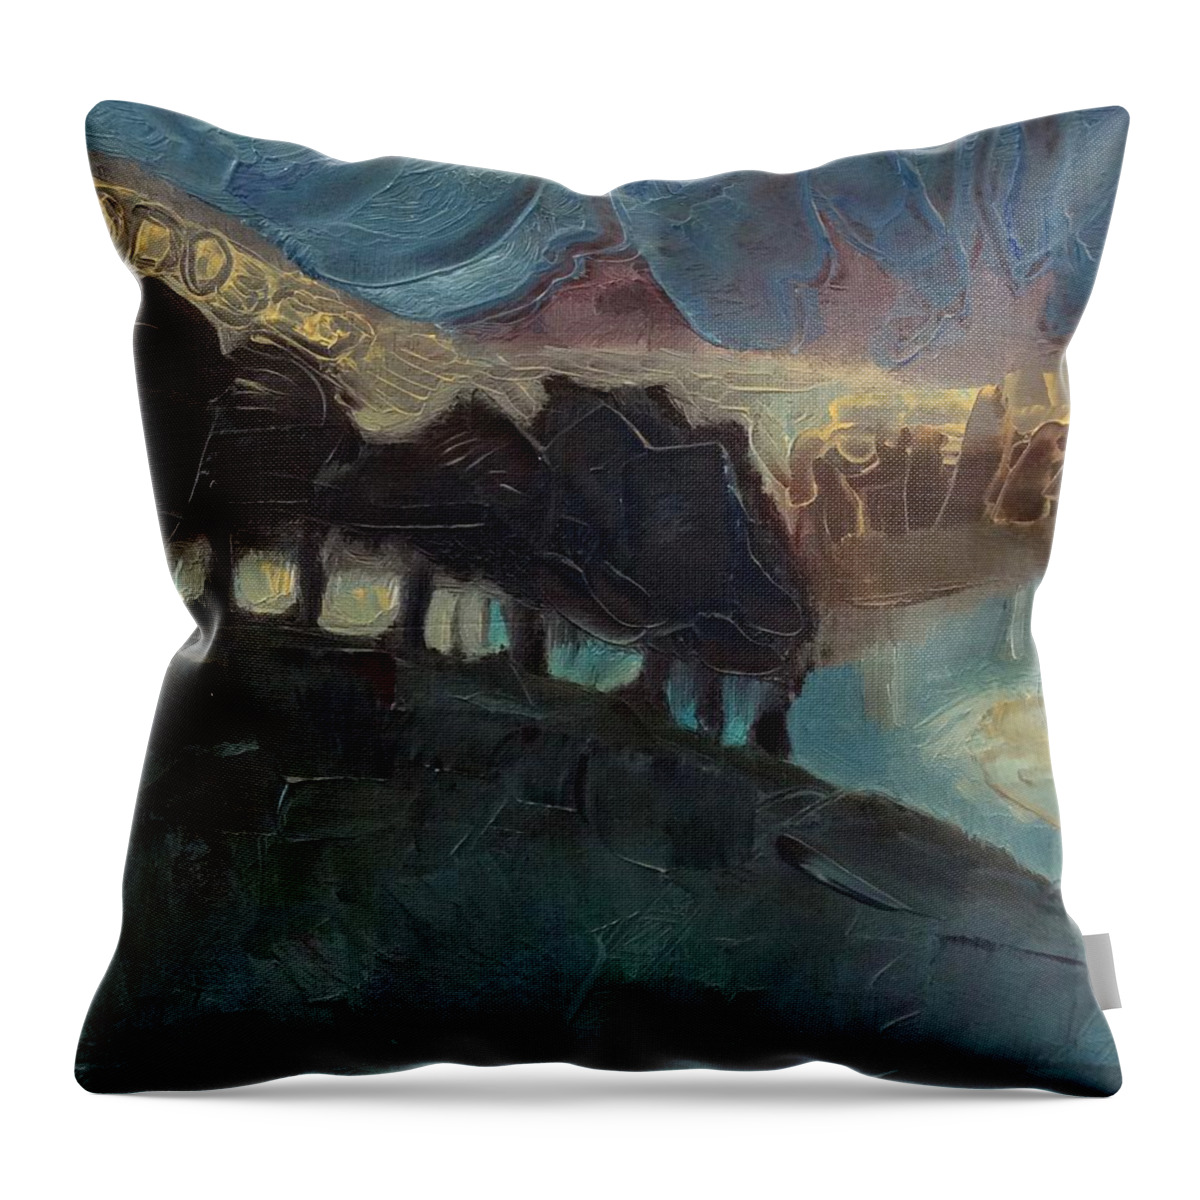 Oil Painting Throw Pillow featuring the painting A Singing Hill by Suzy Norris